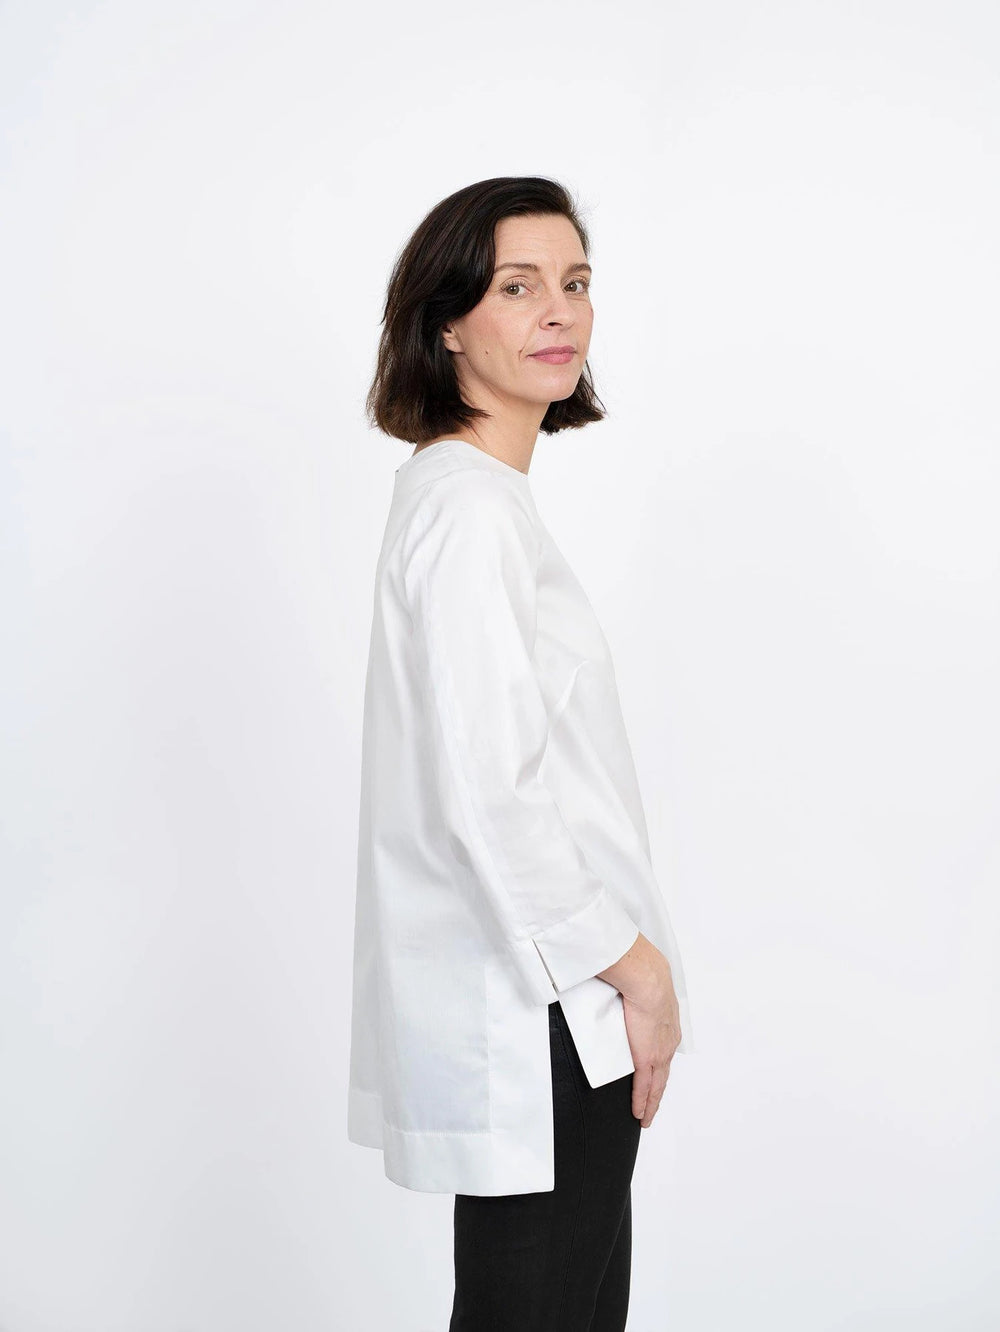 Woman wearing the Long Sleeve Tunic sewing pattern from The Assembly Line on The Fold Line. A tunic pattern made in light to medium weight fabrics such as cotton, featuring a straight silhouette, invisible back zipper, hem and sleeve hem slits, back hem l